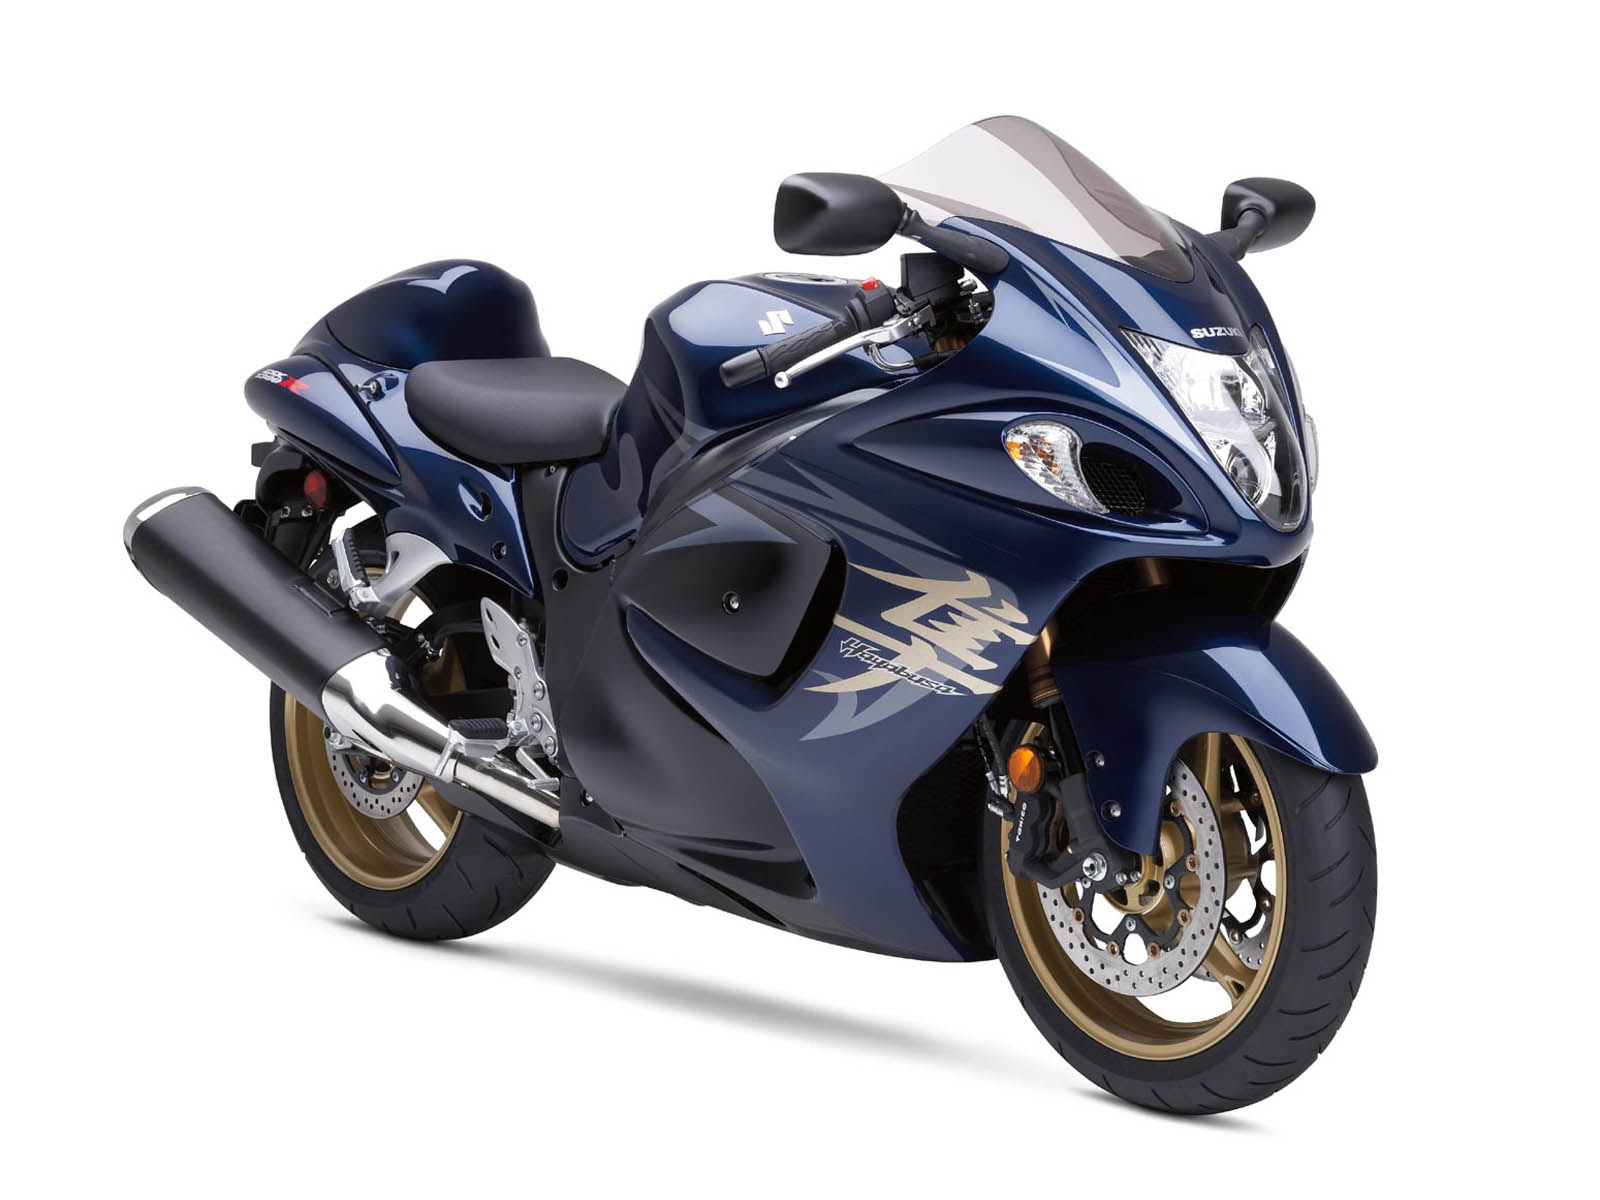 Hayabusa Gsx1300r Bike Wallpaper Image Paos Pictures And Background